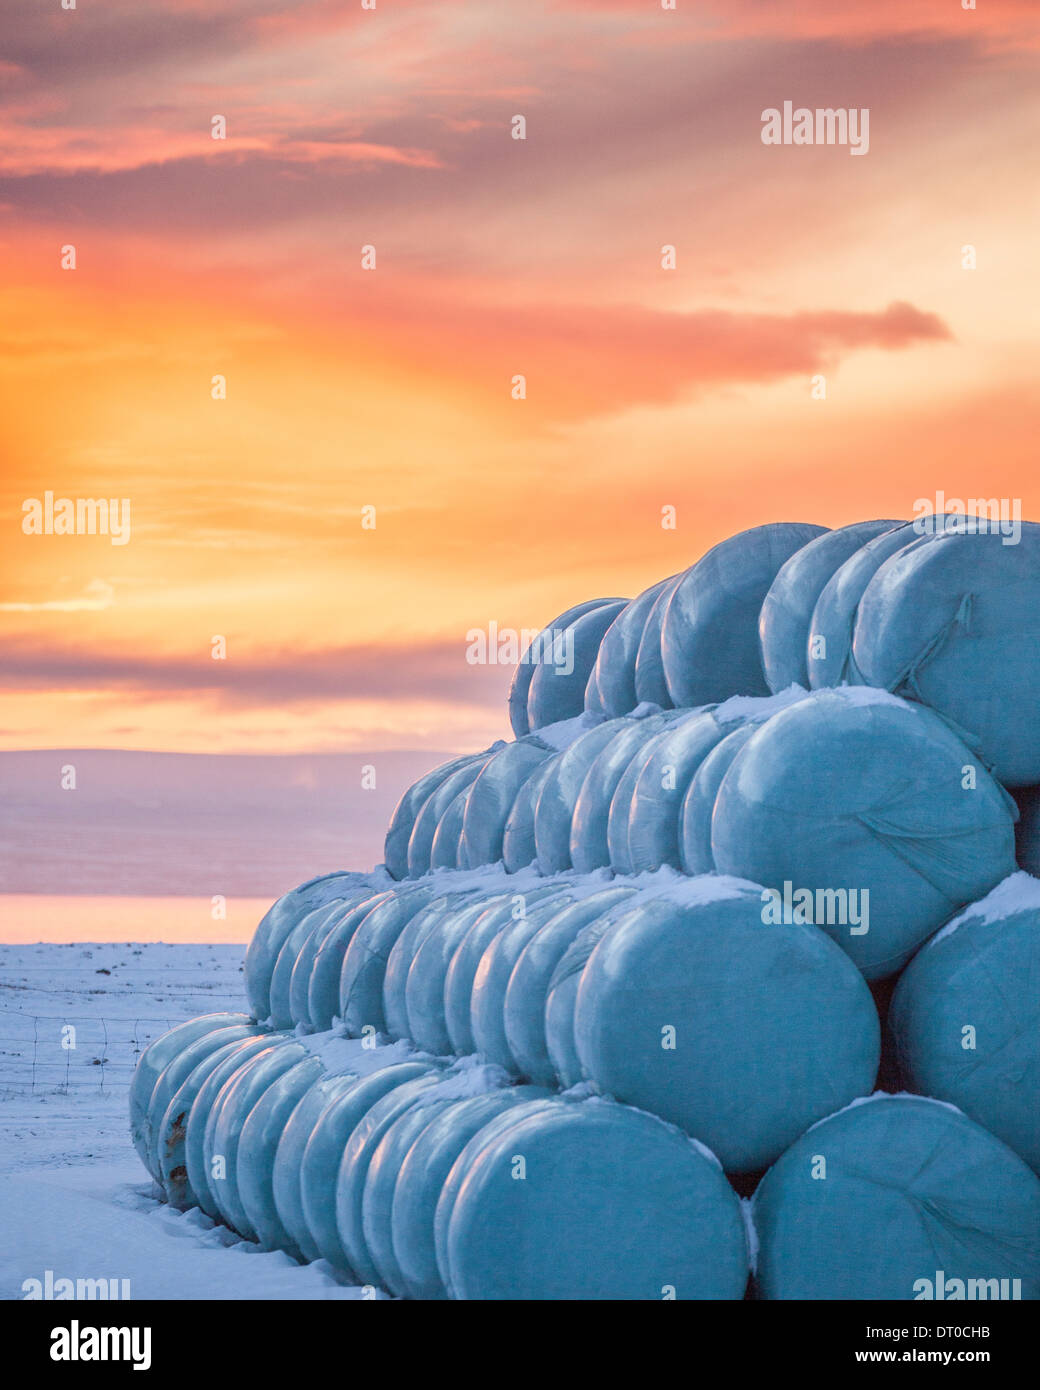 Hay rolls wrapped in plastic, Hunafjordur, Iceland Stock Photo